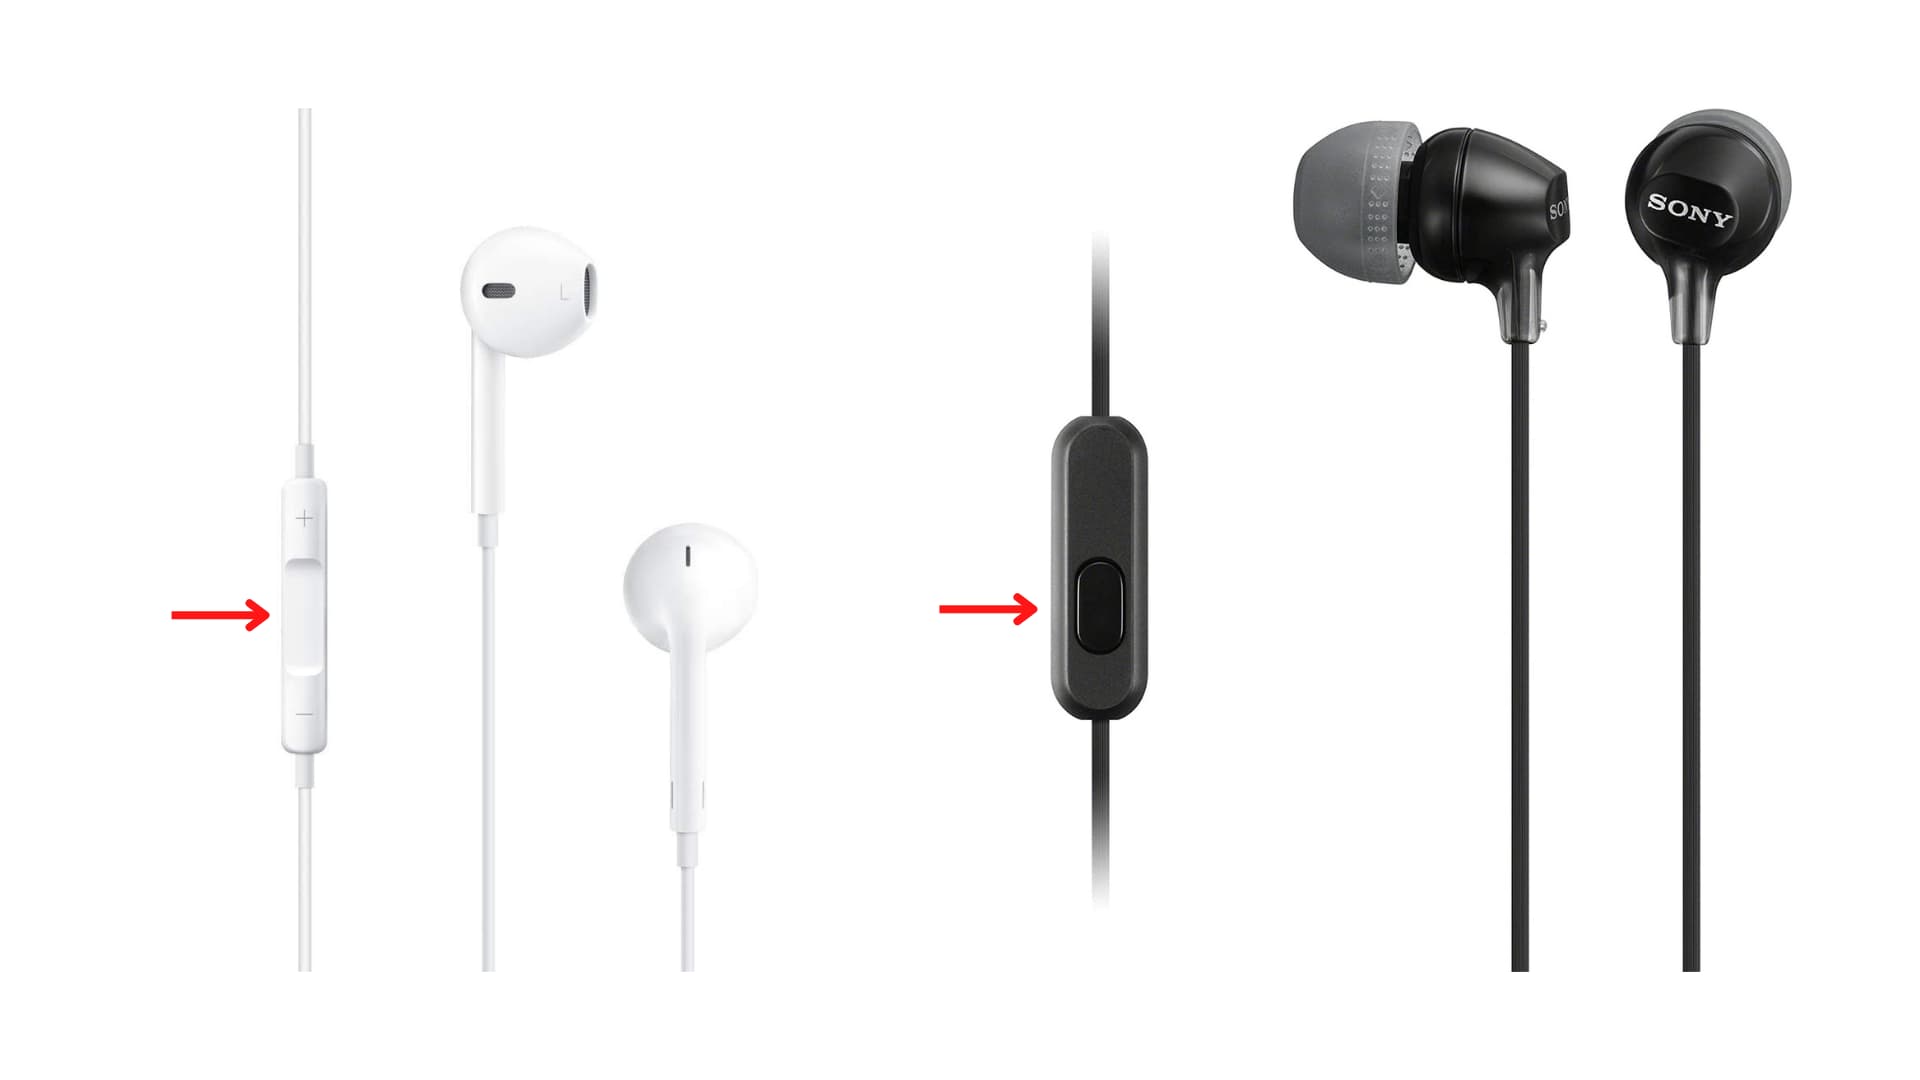 End iPhone call using EarPods or wired earphones